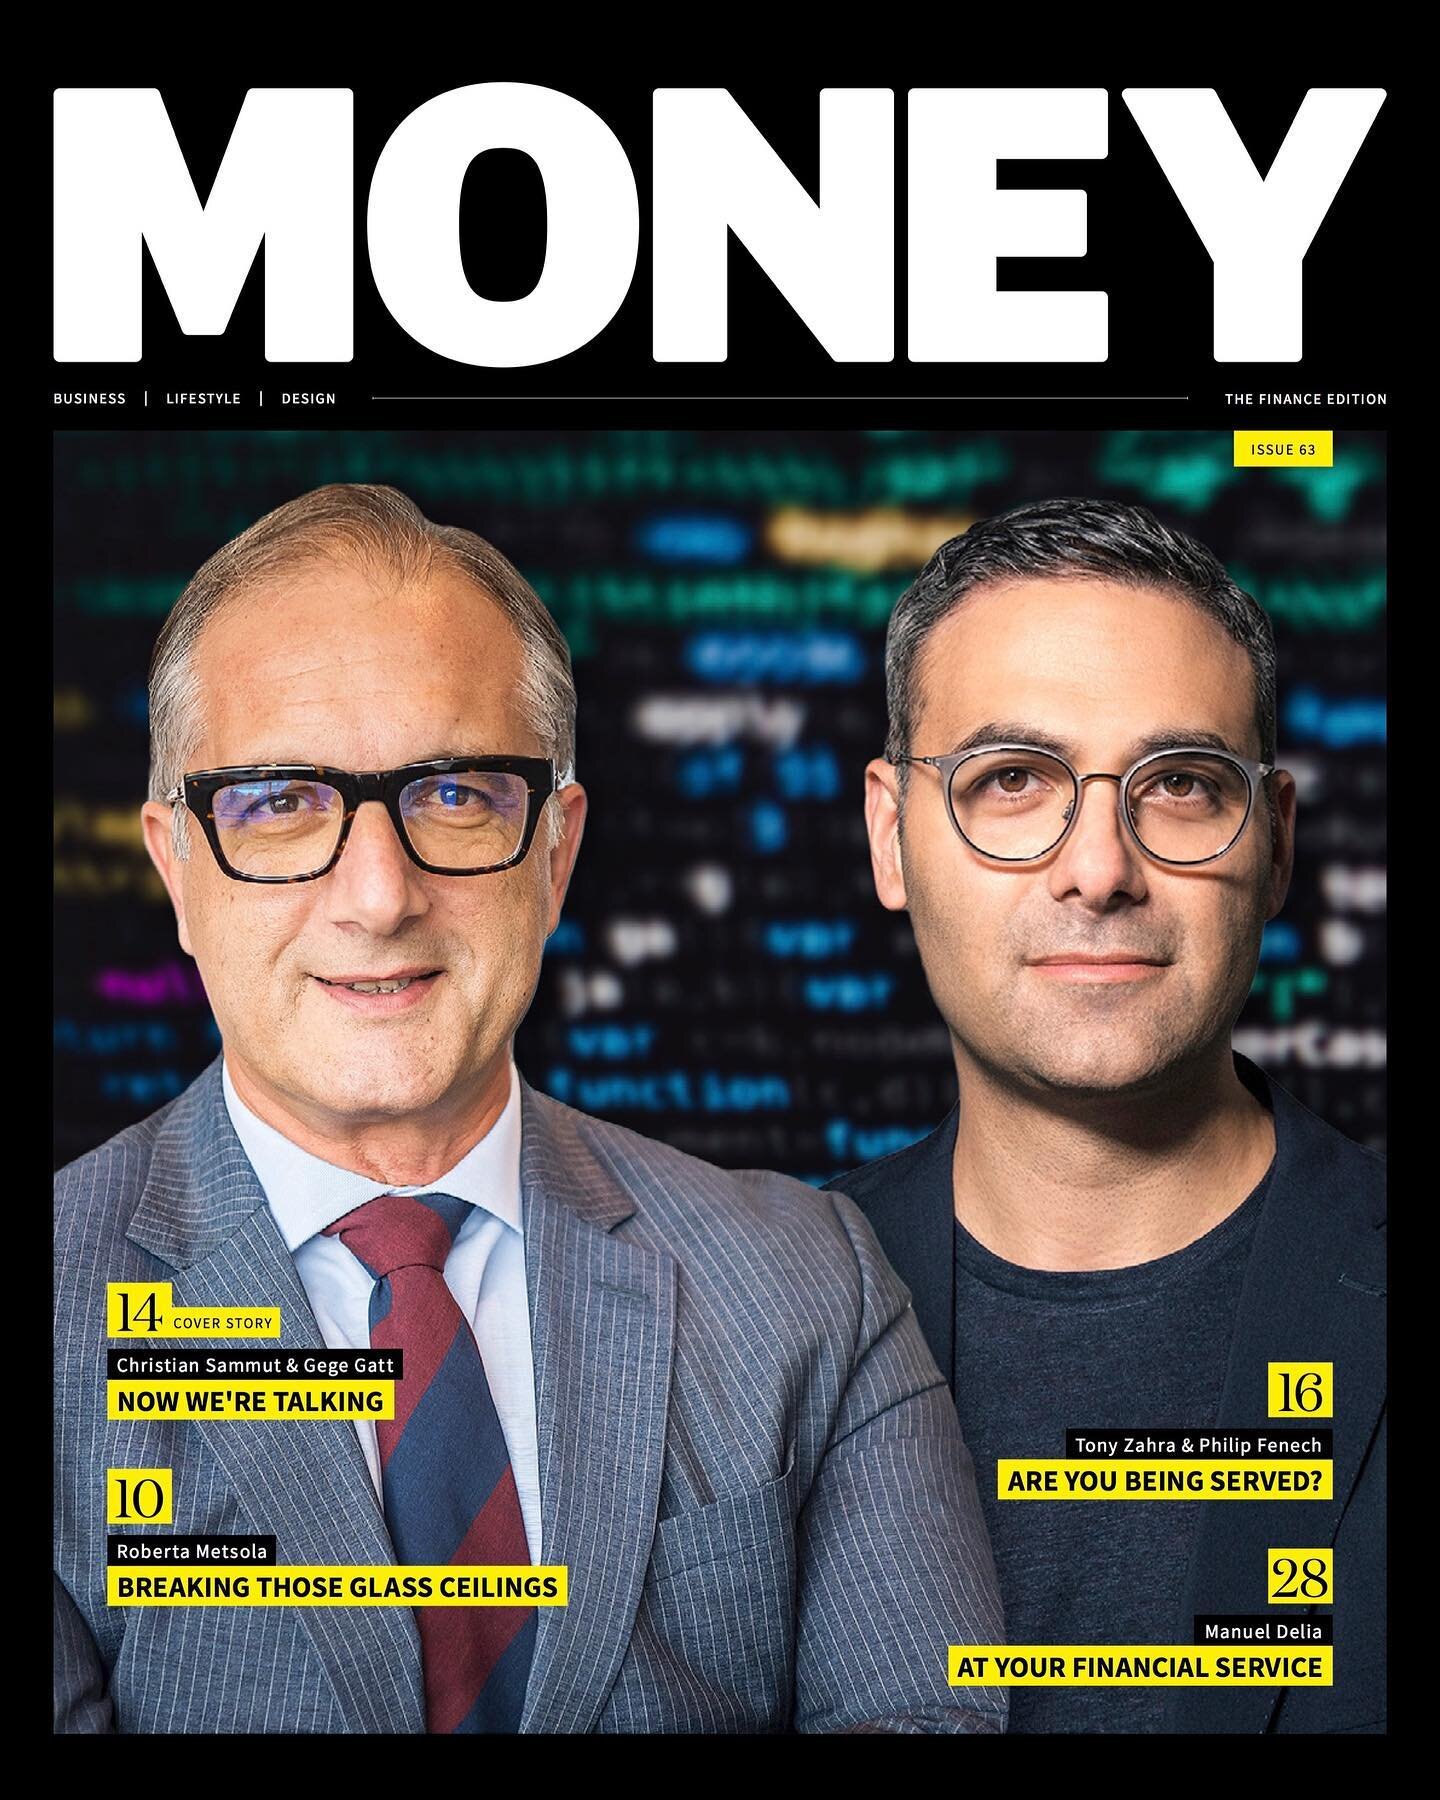 .
The winter edition is up and loaded. Be the first to read the online version! 🤓 💪 🌟
.
🖥📱 http://bit.ly/Money63
.
.
#moneymag #bmit #ebo #robertametsola #business #economy #recovery #politics #strategy #coaching #branding #fashionphotography #t